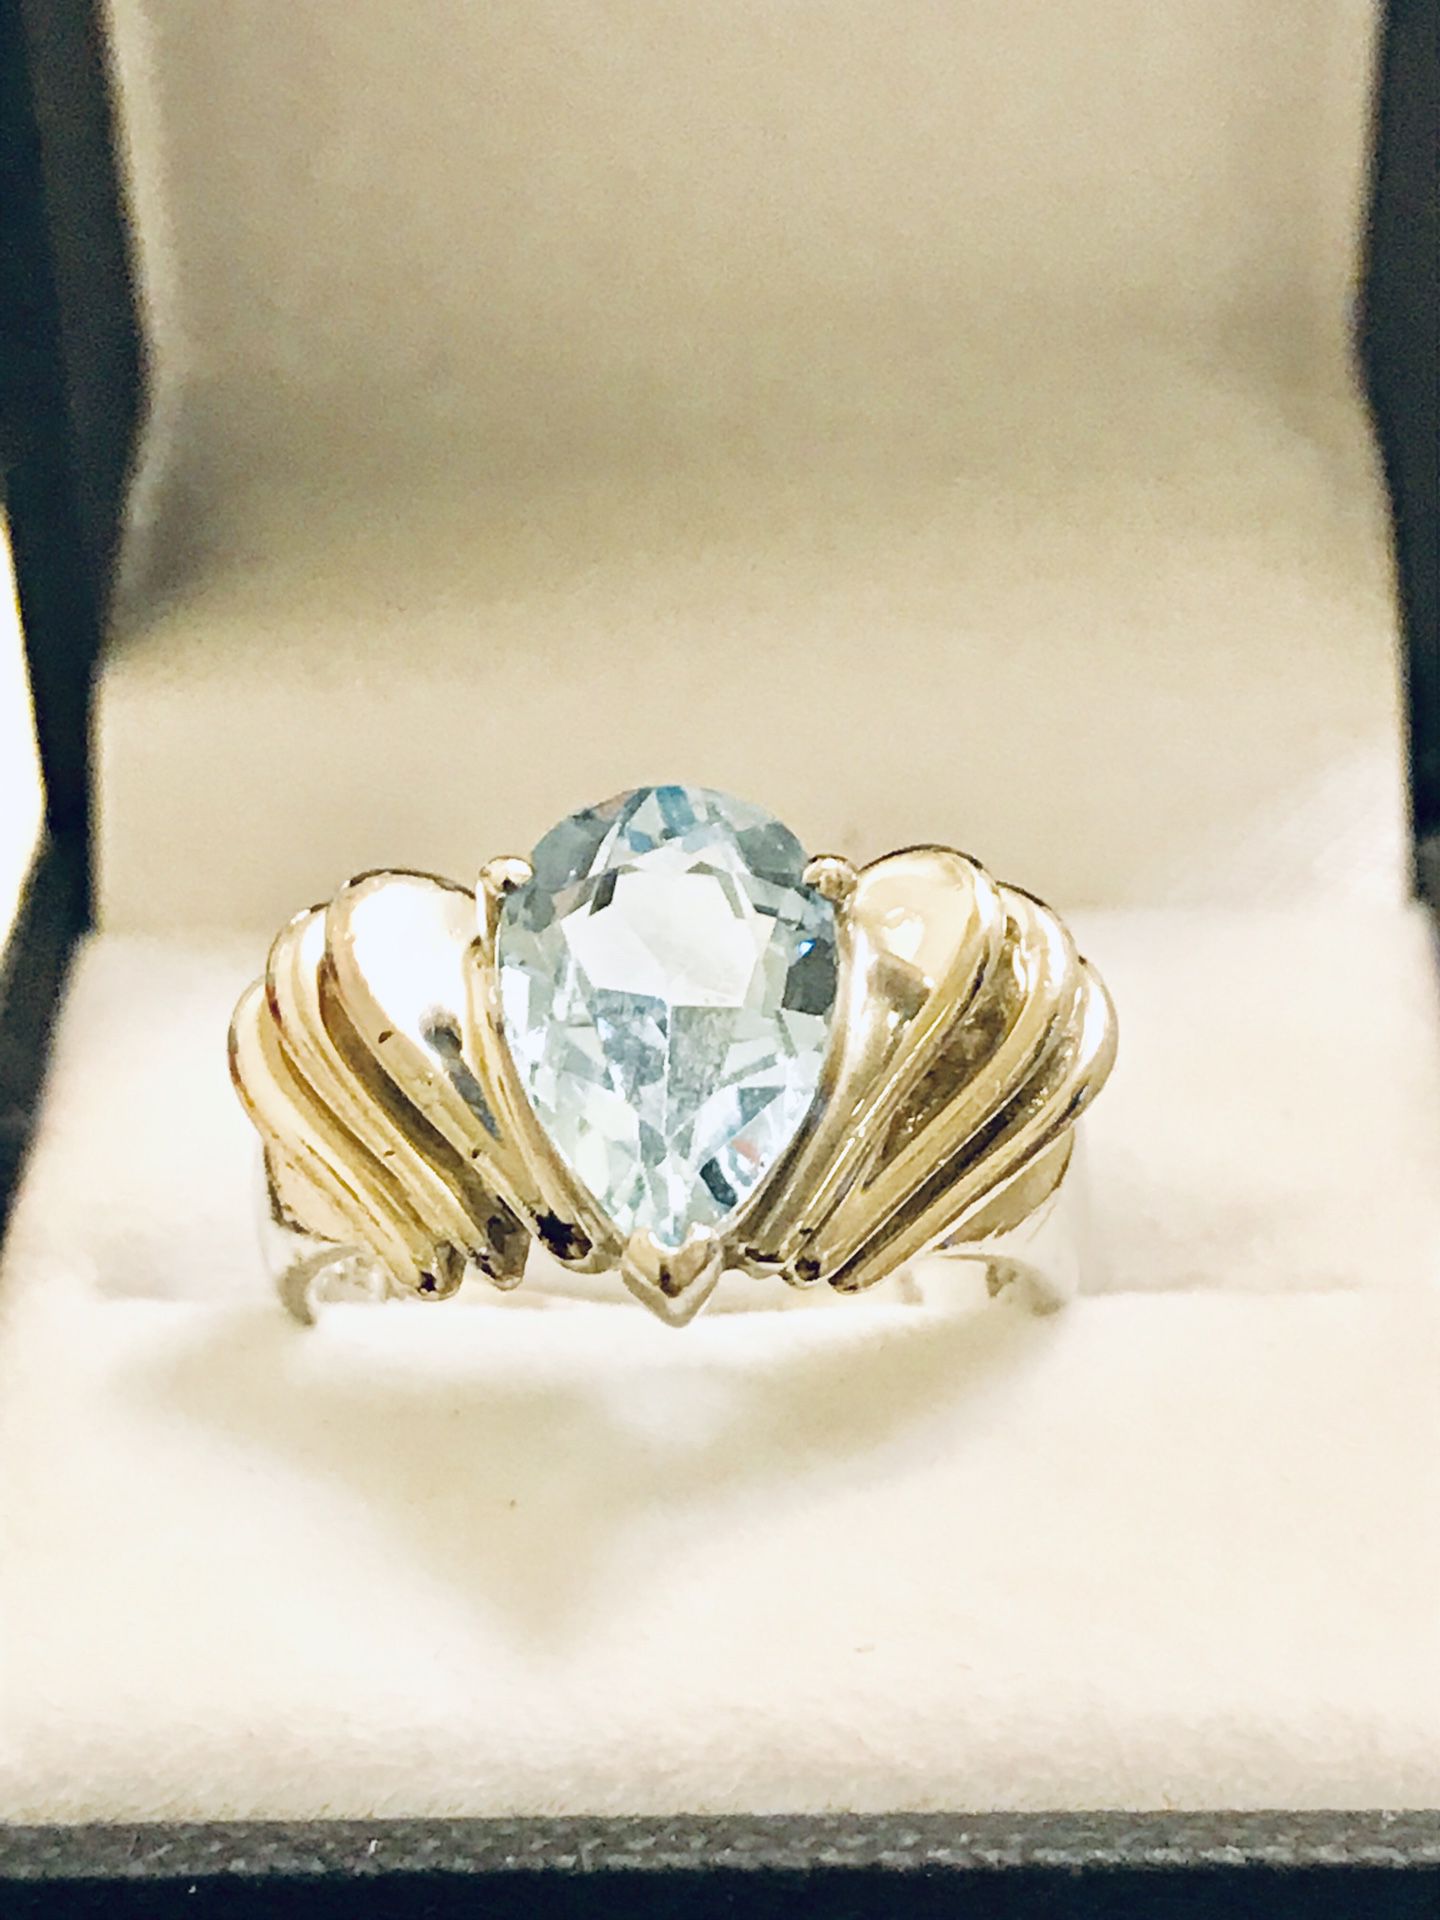 Black Hills Gold Co. Sterling Silver and Aquamarine Ring